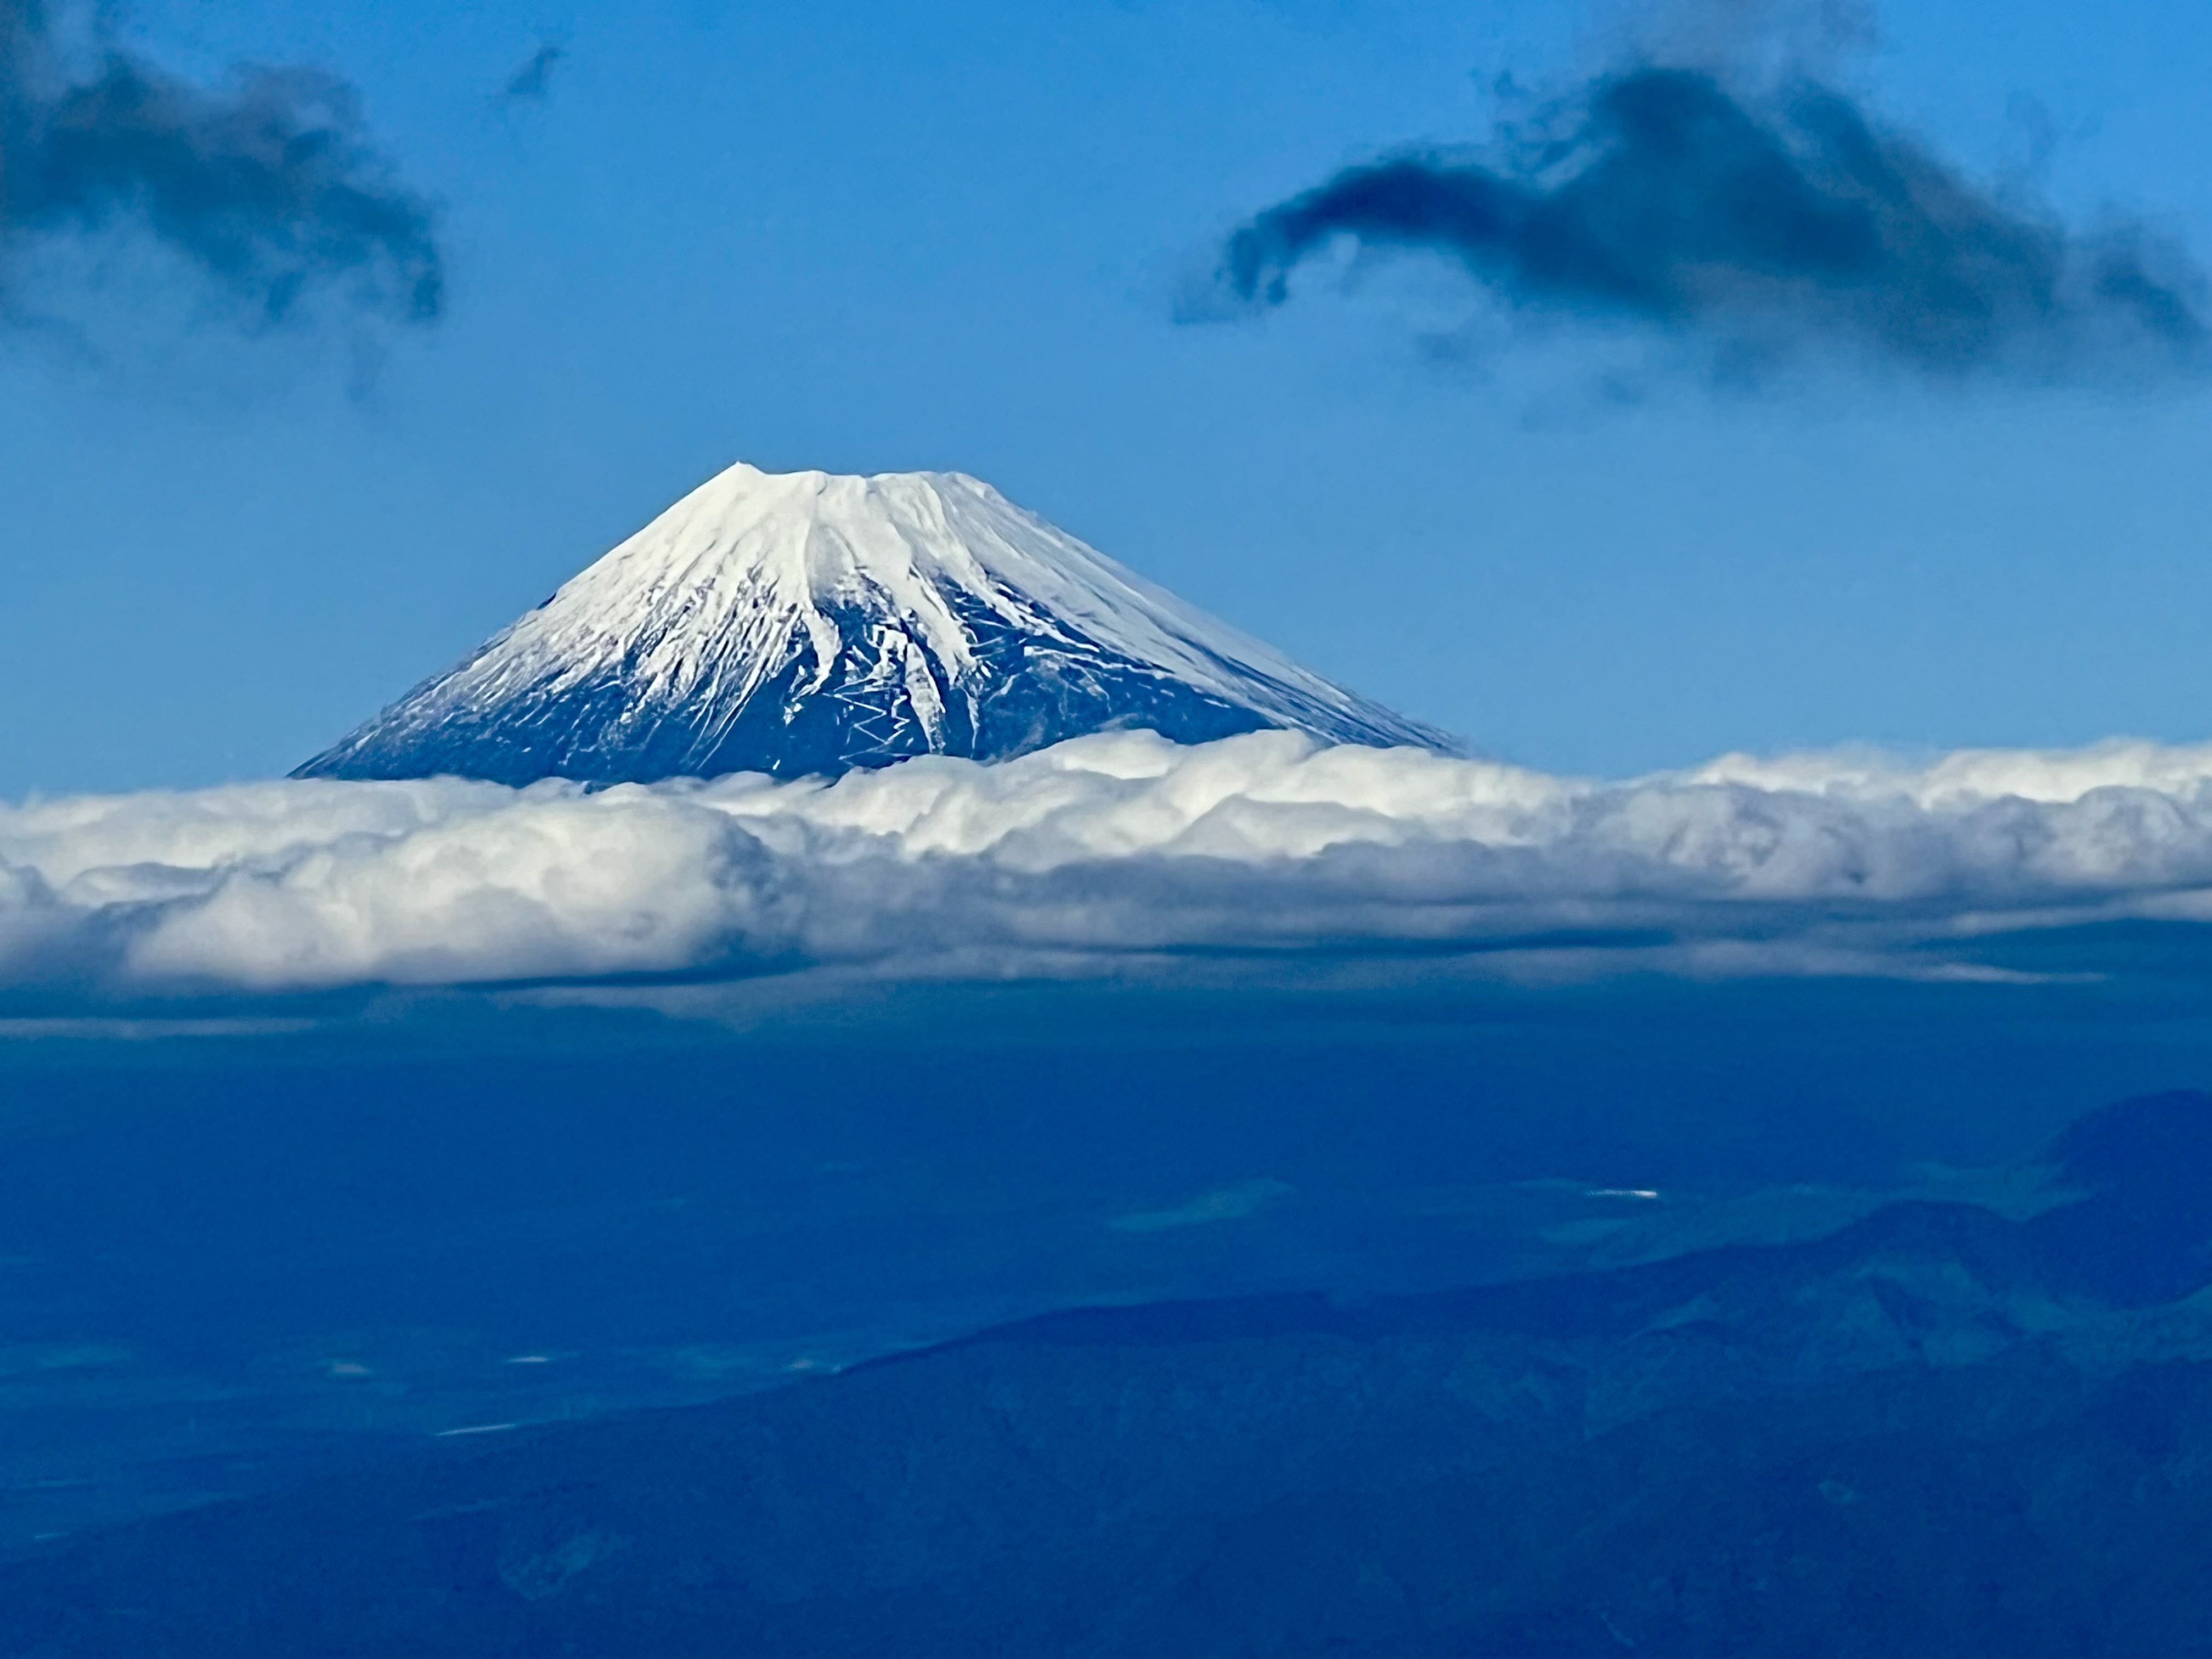 Snow-capped Mount Fuji above clouds and against a blue sky.